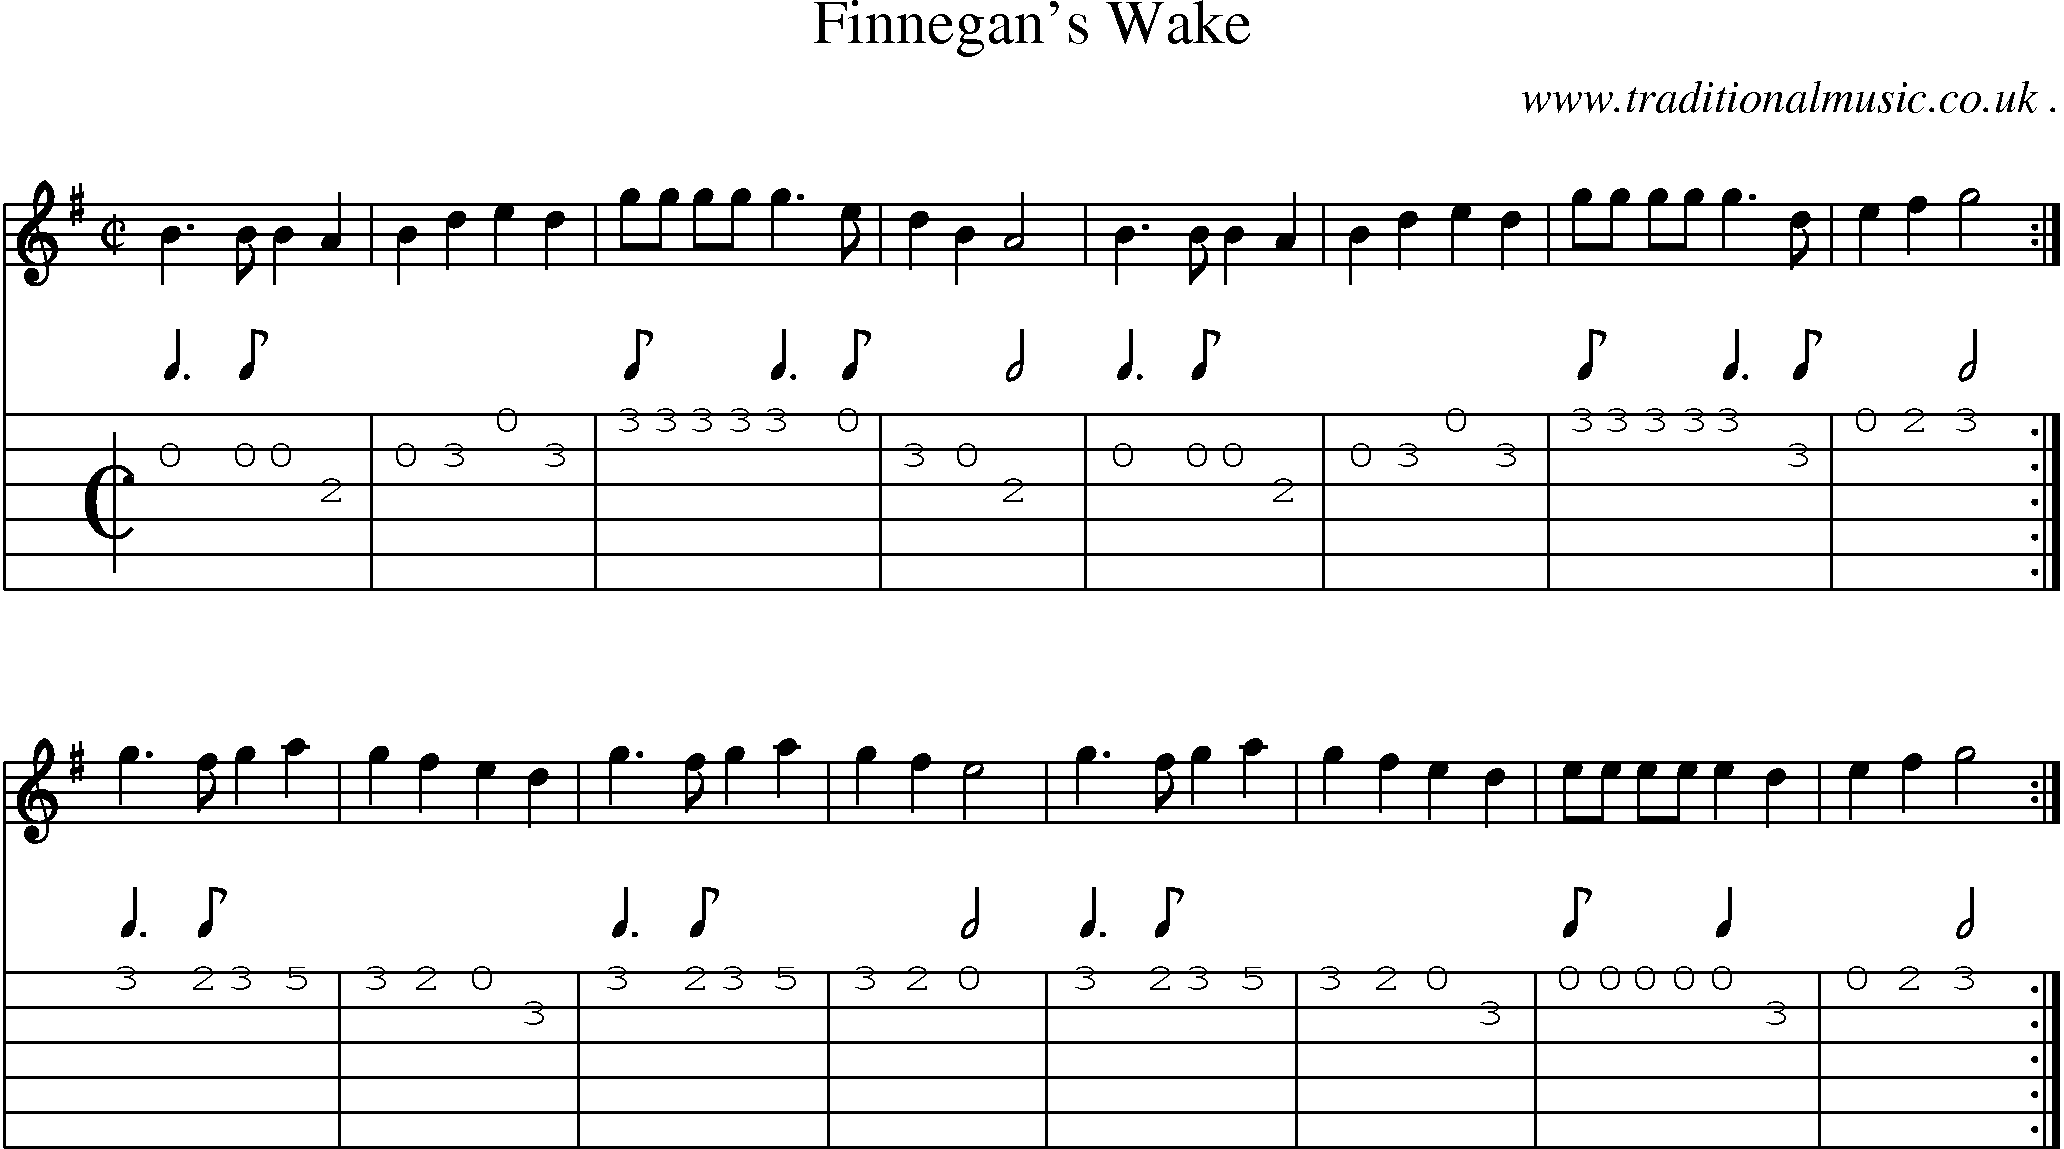 Sheet-Music and Guitar Tabs for Finnegans Wake